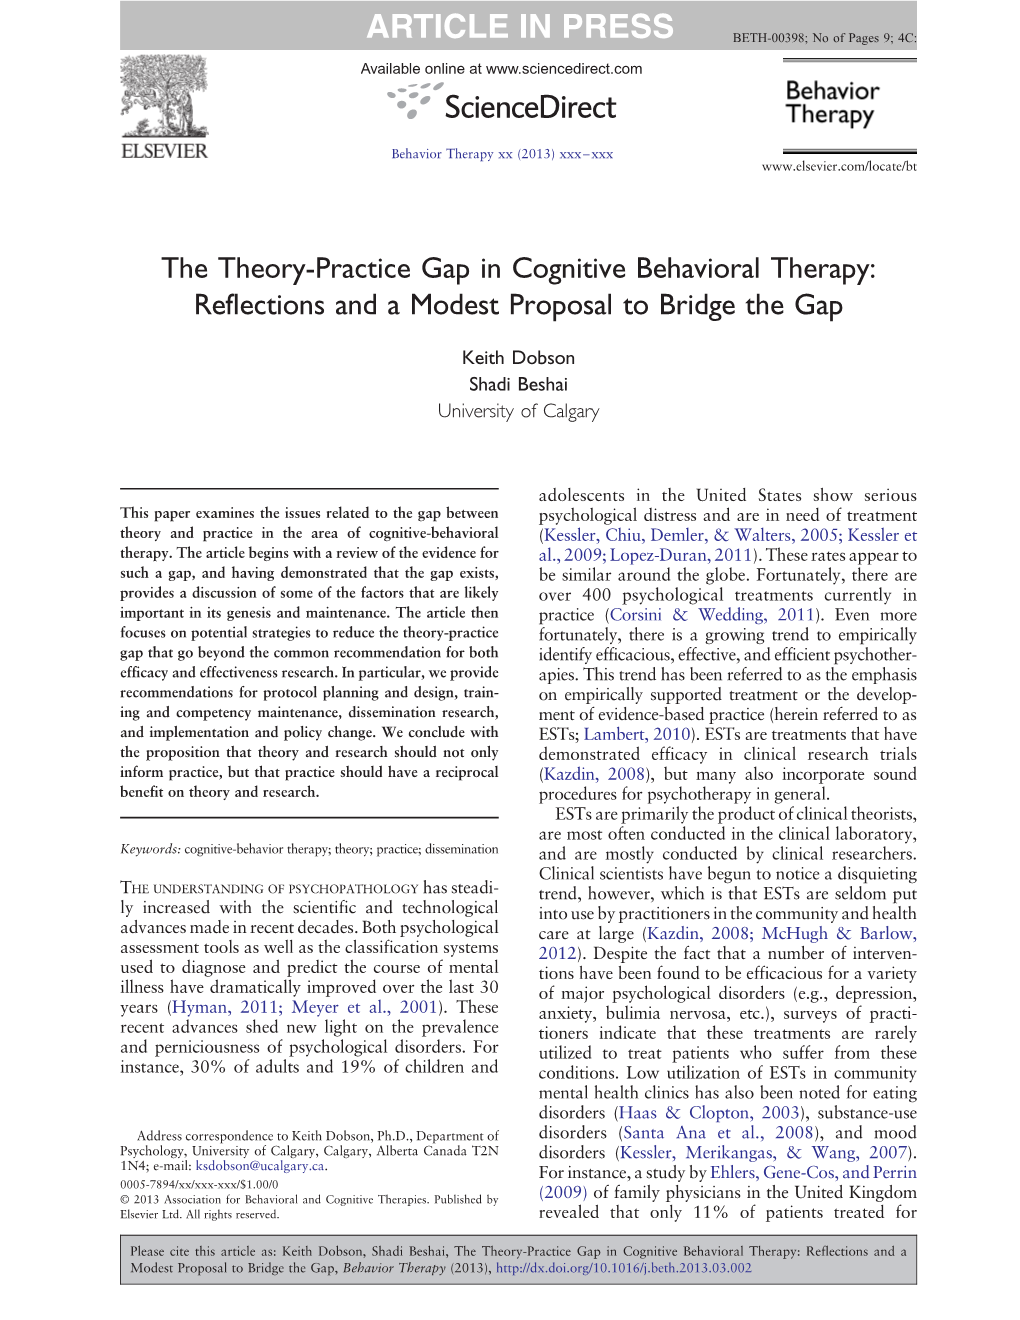 The Theory-Practice Gap in Cognitive Behavioral Therapy: Reflections and a Modest Proposal to Bridge the Gap